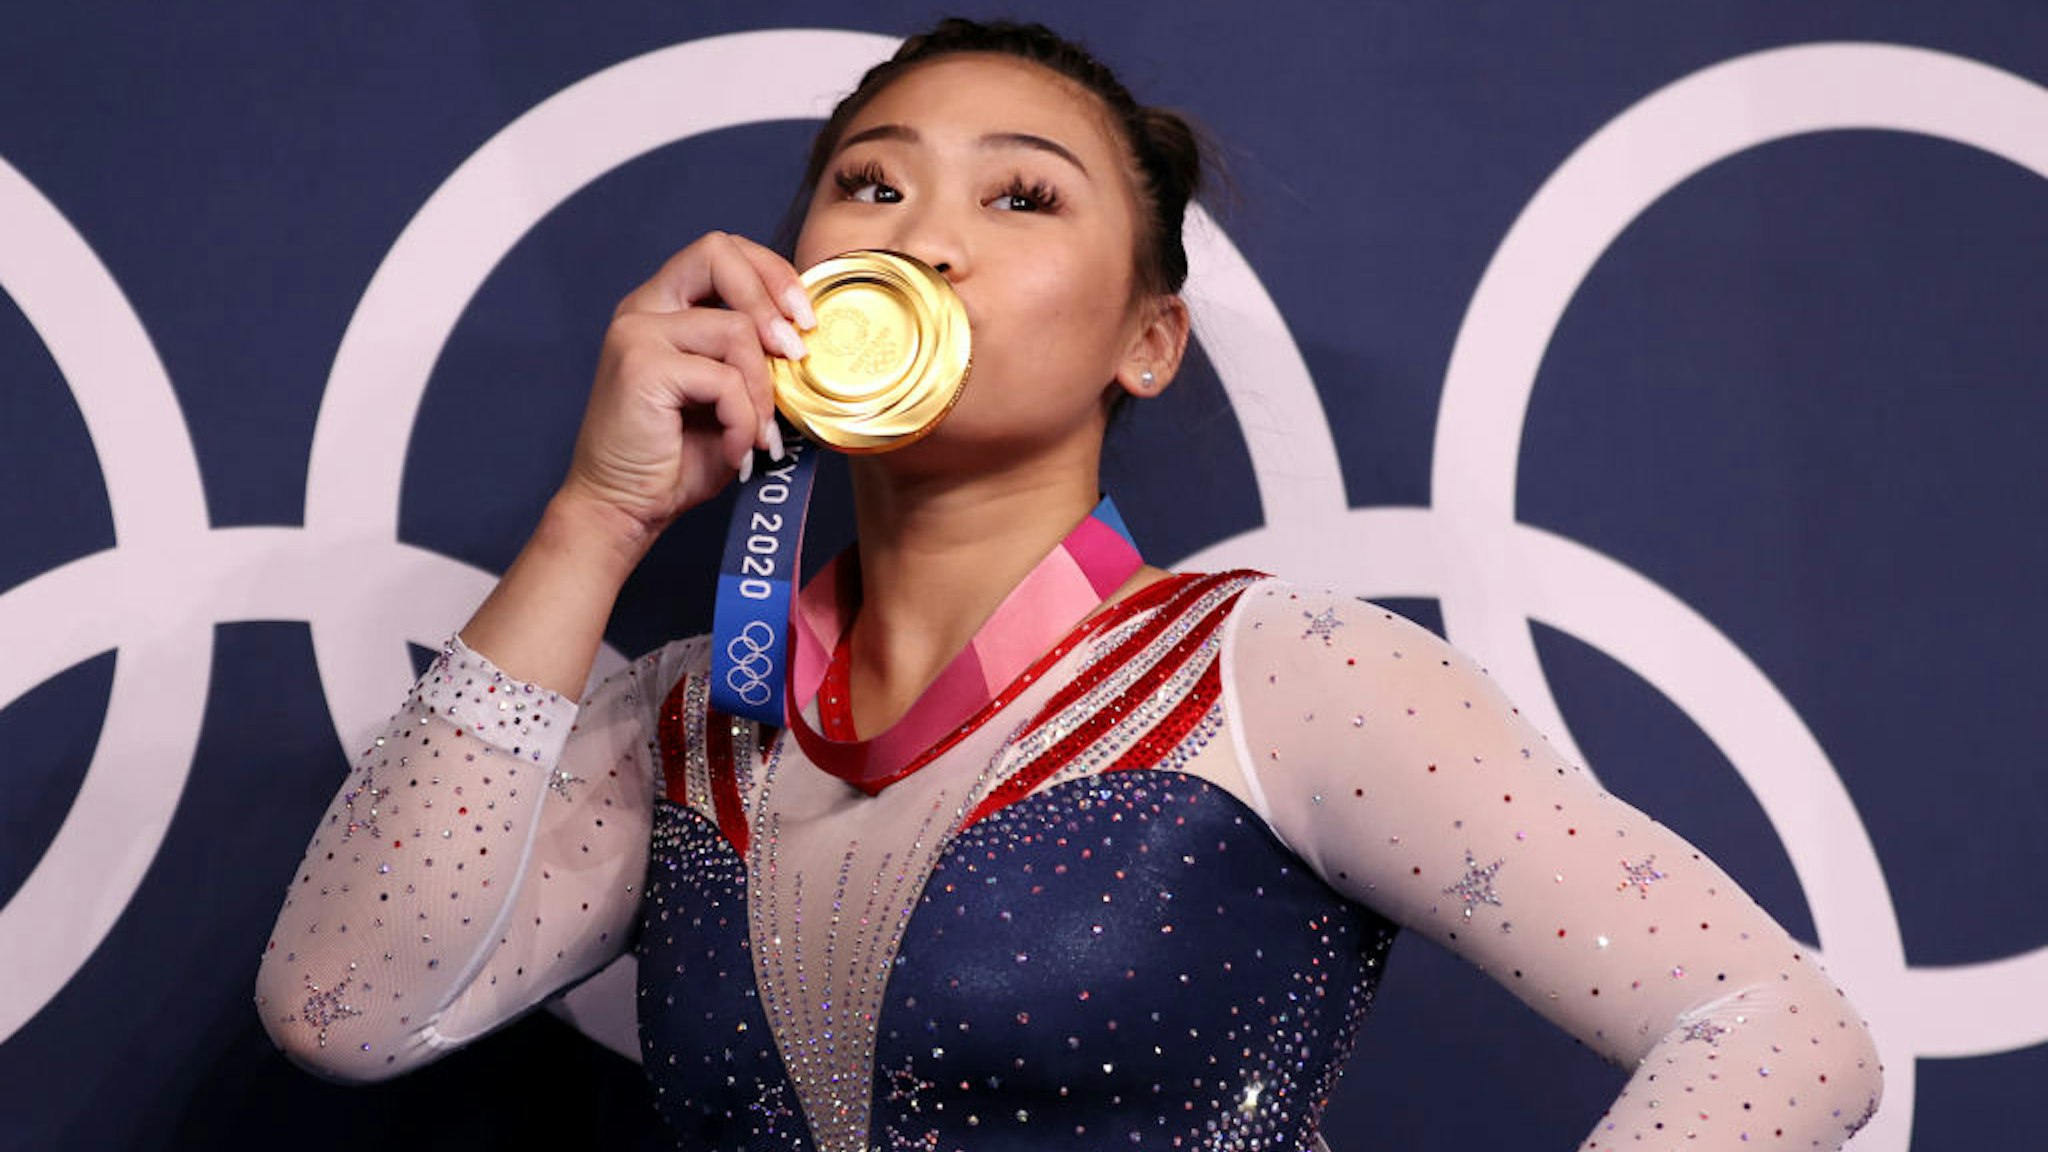 TOKYO, JAPAN - JULY 29: Sunisa Lee of Team United States poses with her gold medal after winning the Women's All-Around Final on day six of the Tokyo 2020 Olympic Games at Ariake Gymnastics Centre on July 29, 2021 in Tokyo, Japan. (Photo by Laurence Griffiths/Getty Images)